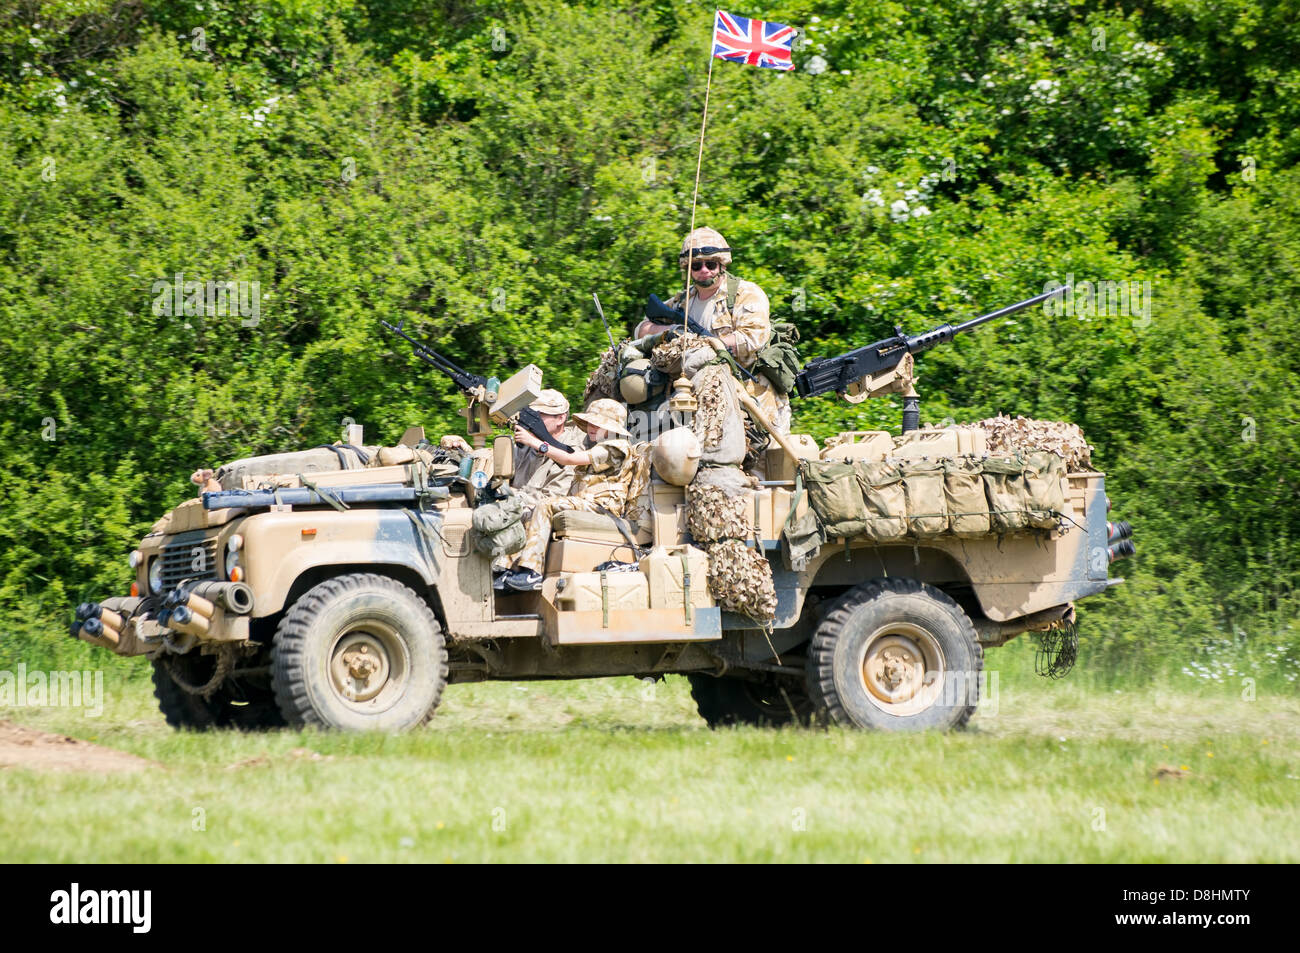 British Army Land Rover 110 HiCap V8 SAS SOV Special Operations Vehicle on display at the 2013 Denmead Overlord, D-Day display Stock Photo